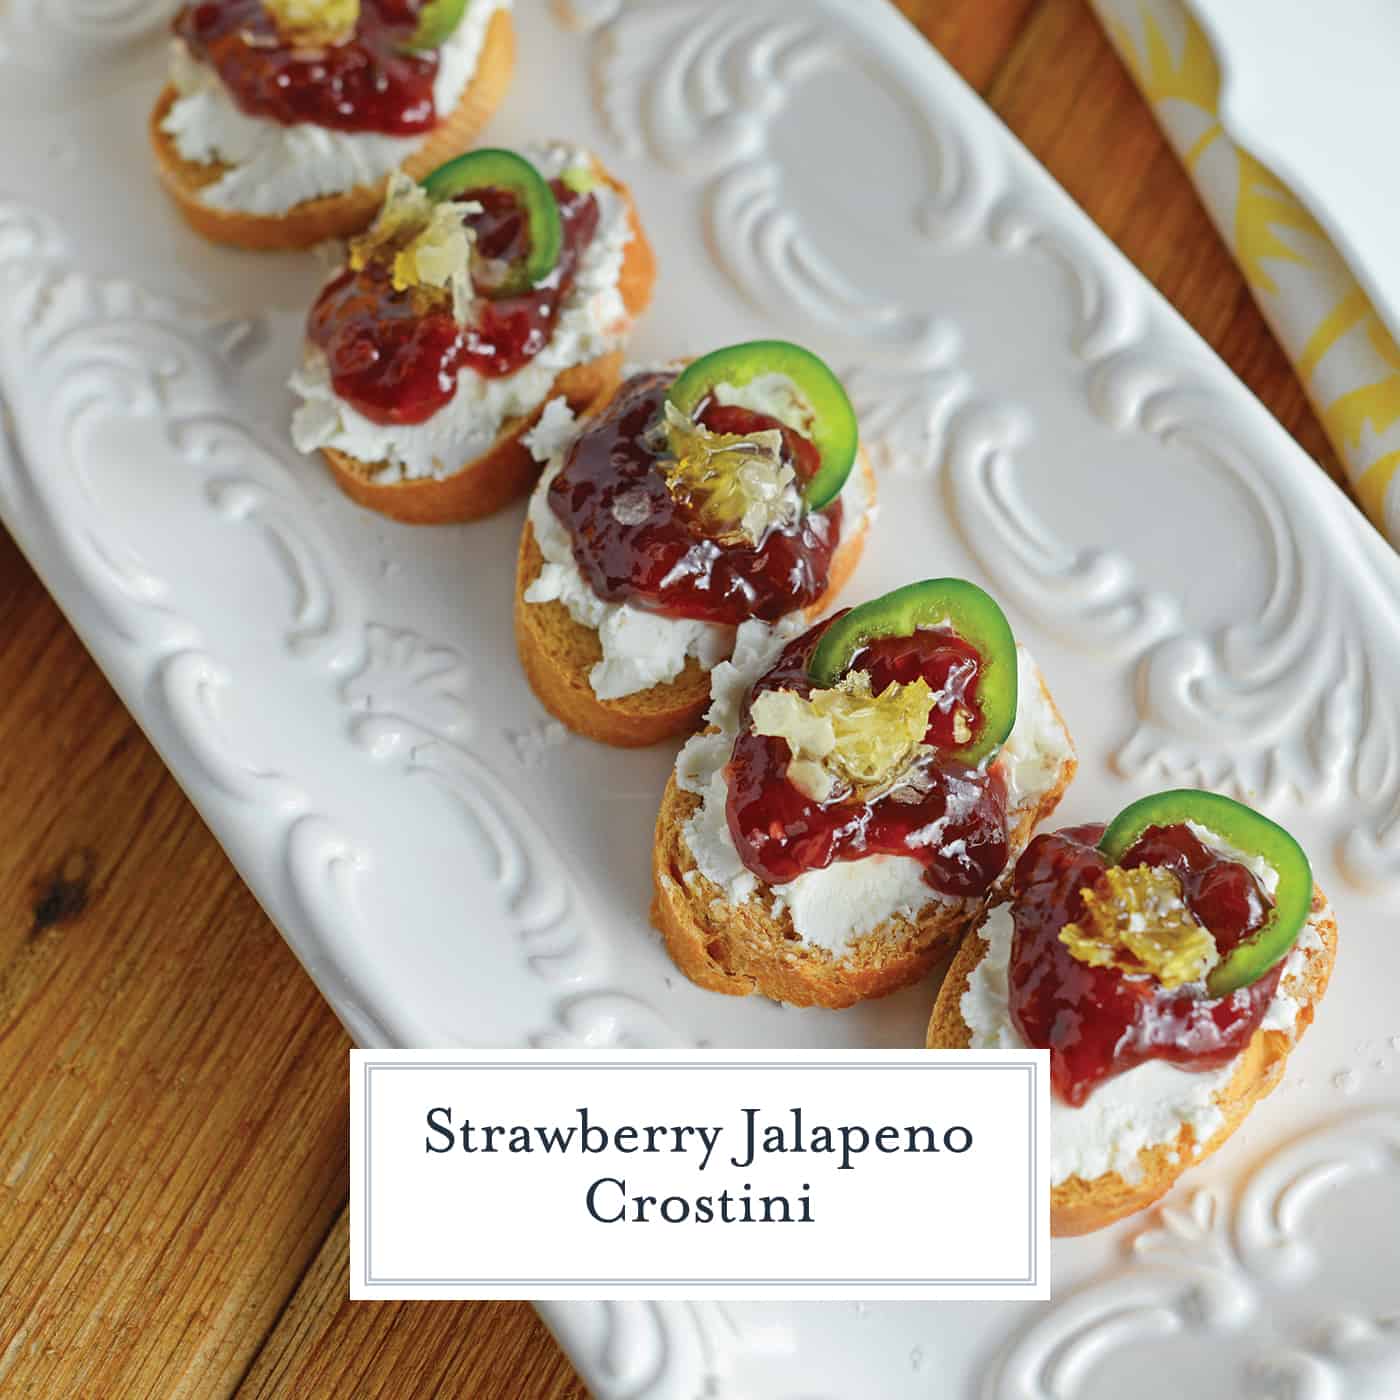 Strawberry Jalapeño Crostini are a sweet heat perfect for a quick snack or entertaining. Sweet, spicy and savory, they are the perfect blend! #crostinirecipes www.savoryexperiments.com 